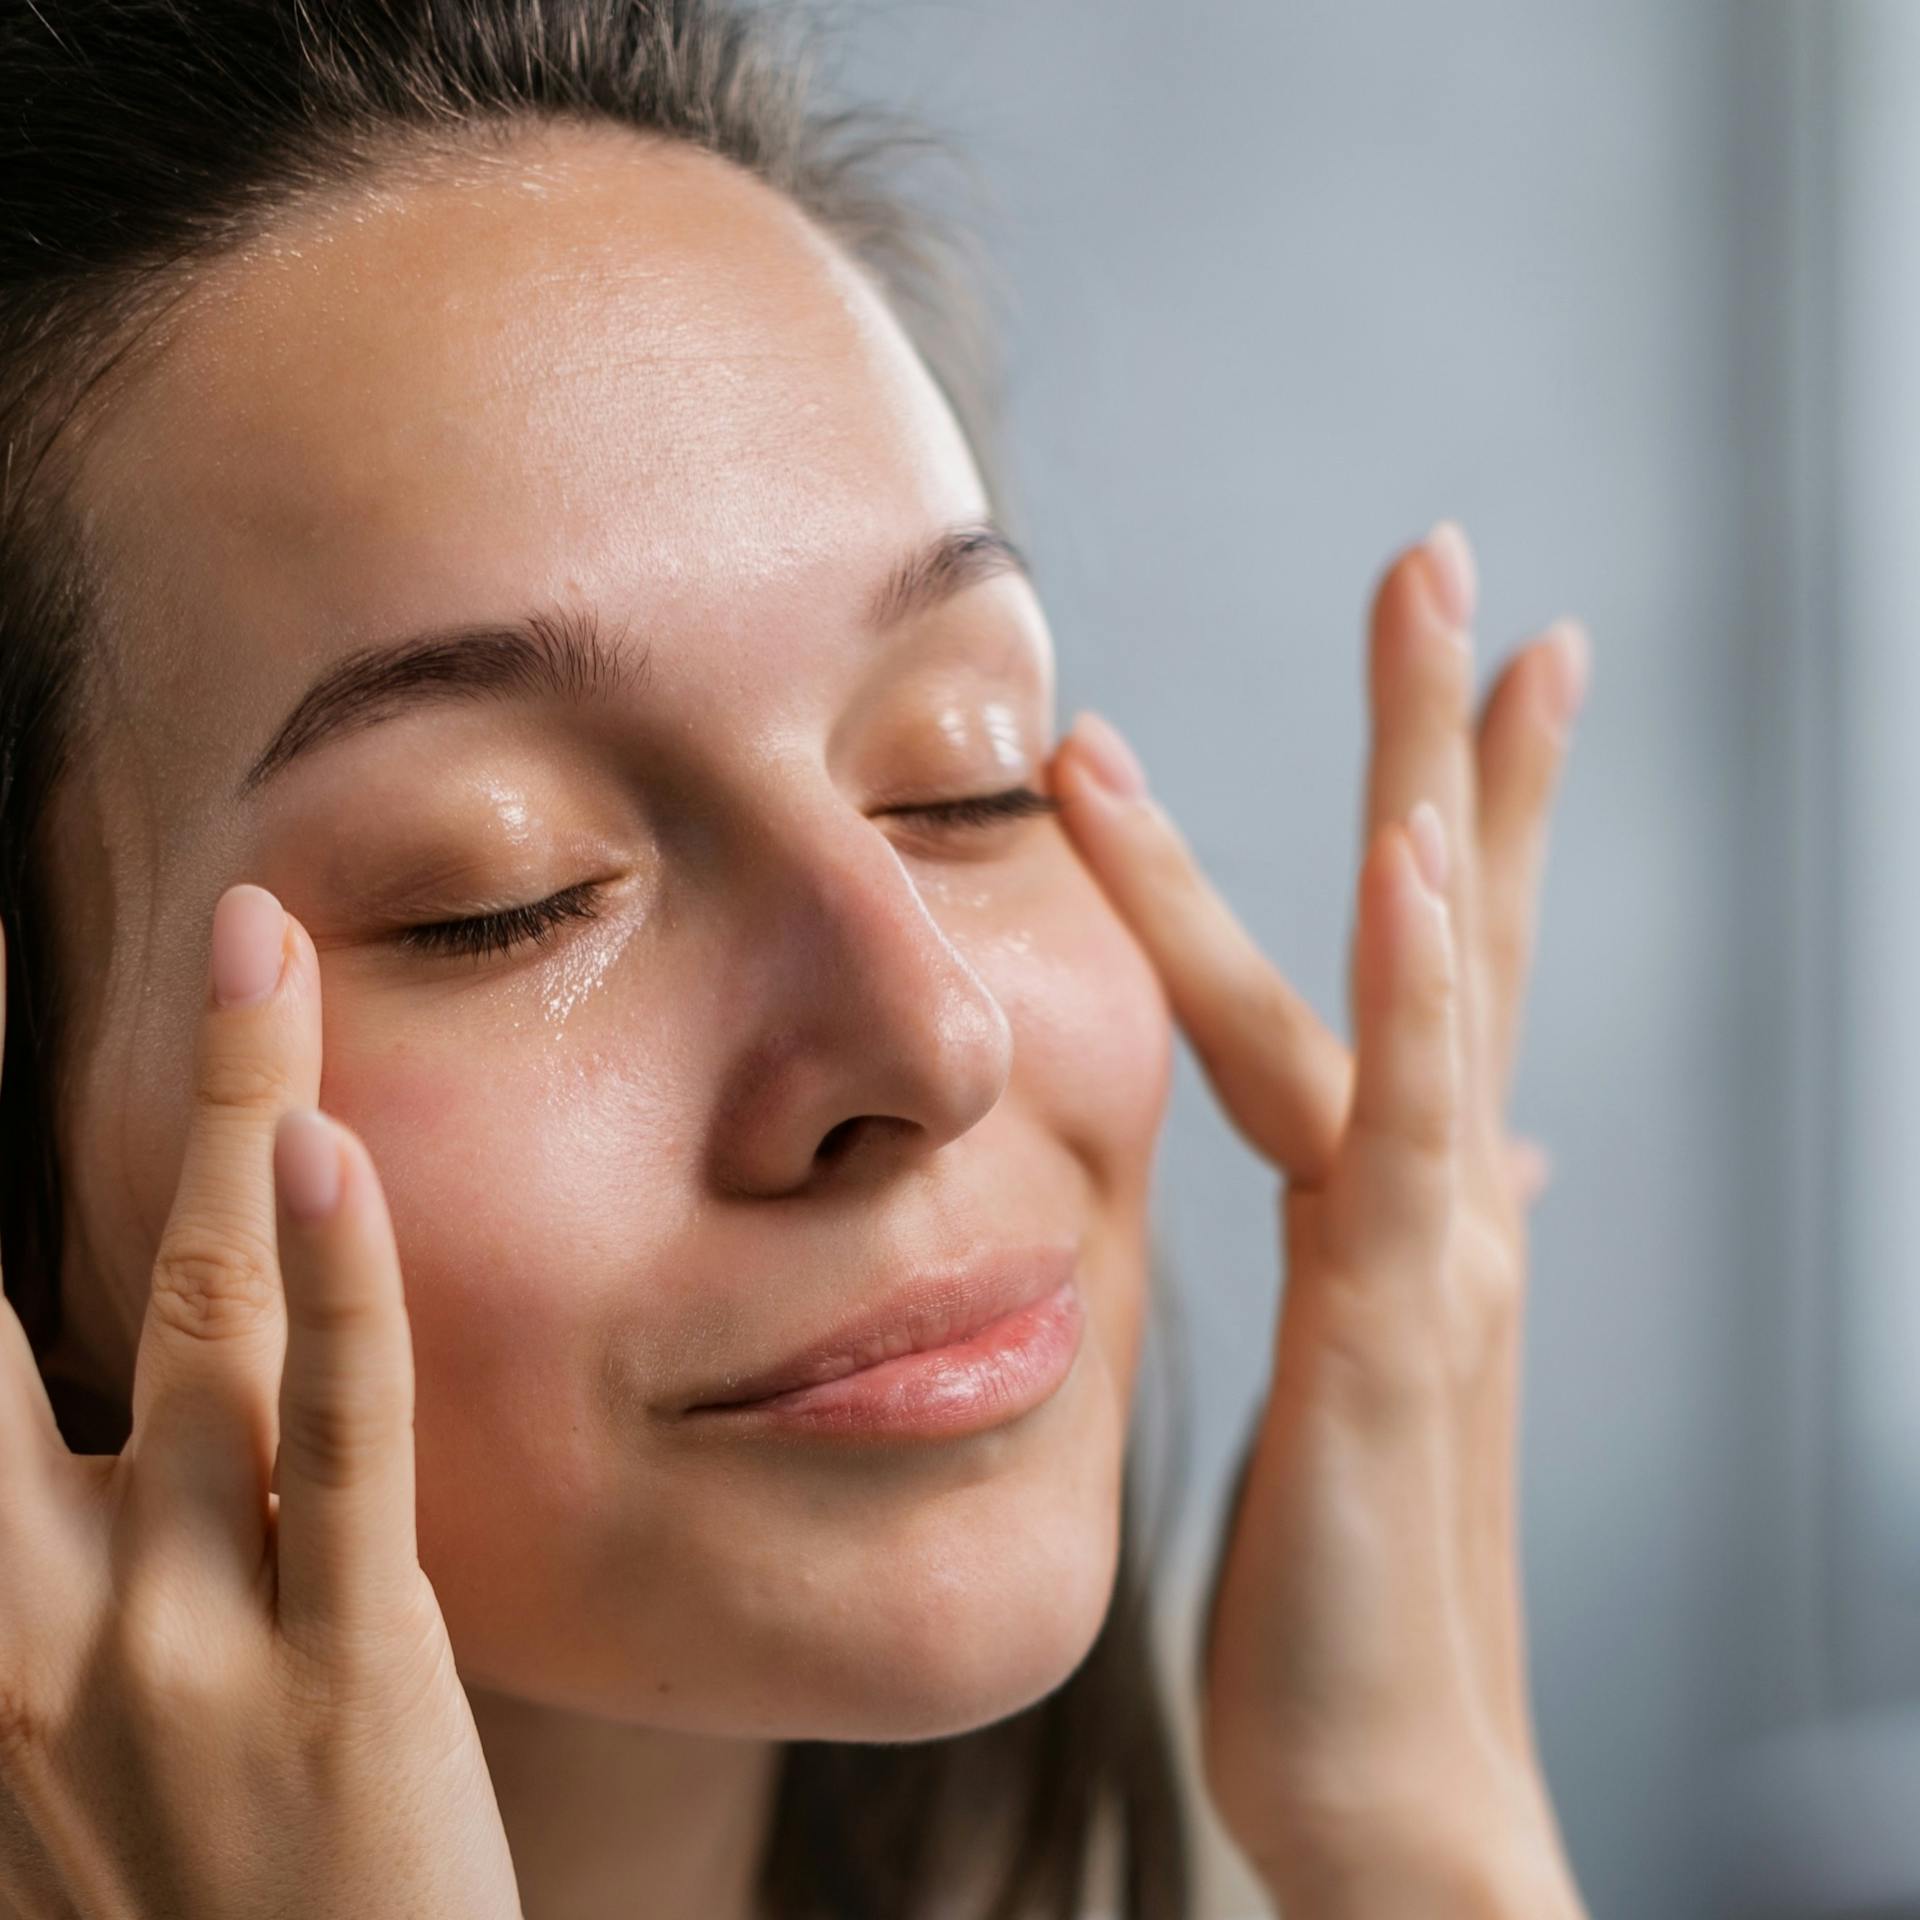 How to reduce redness and soothe inflammation